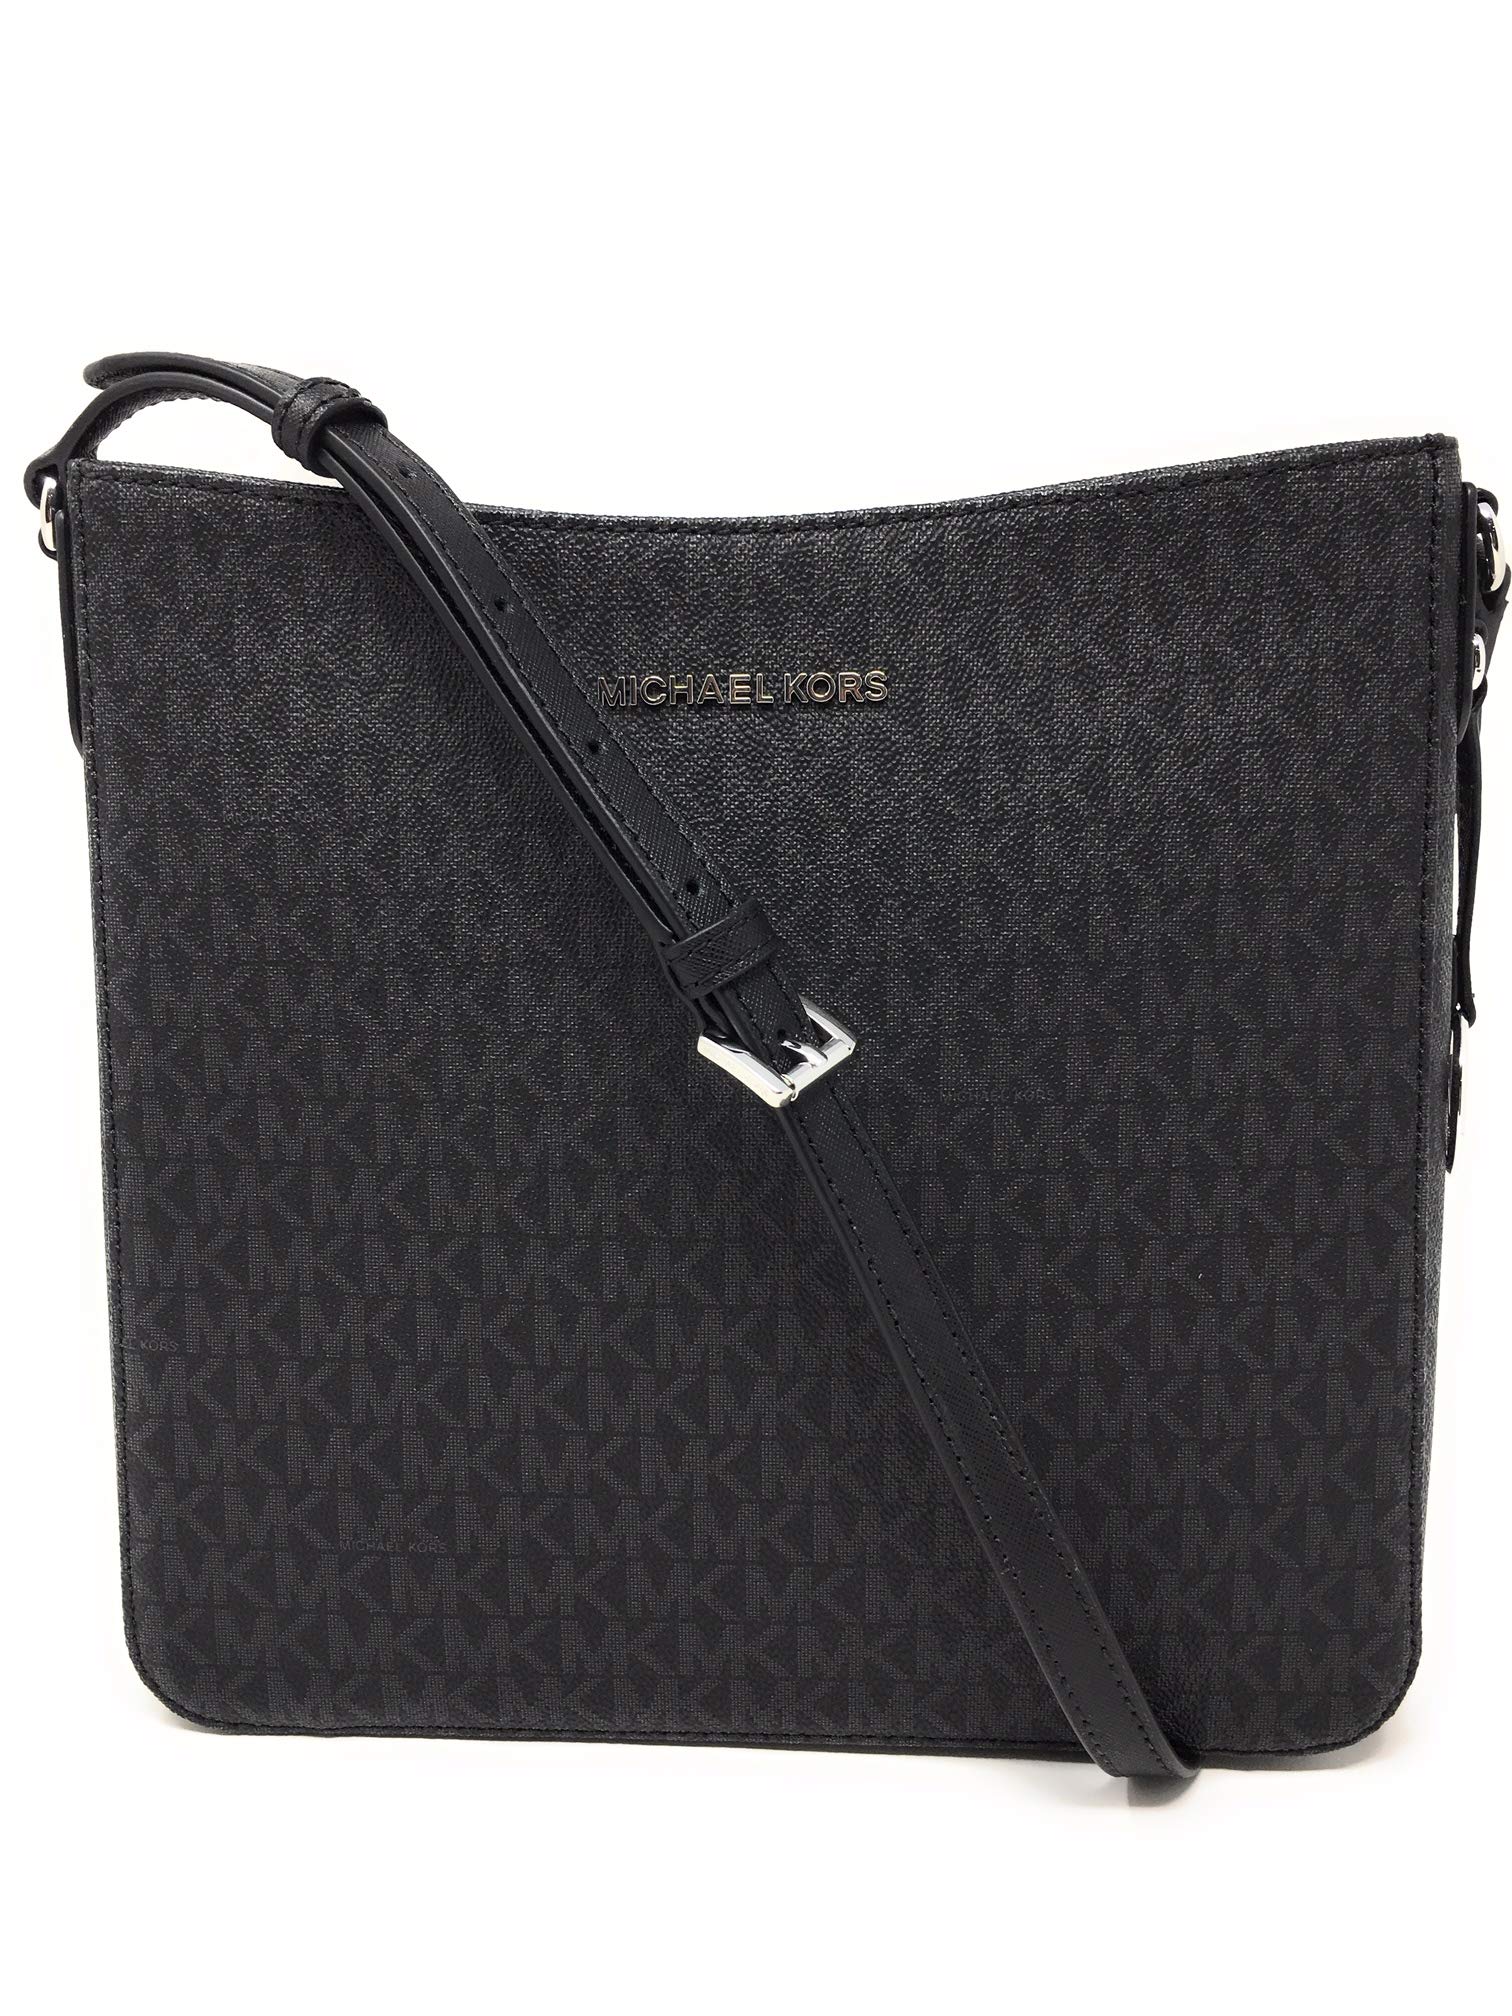 Michael Kors Briley Small Pebbled Leather Messenger Bag in Black  Lyst